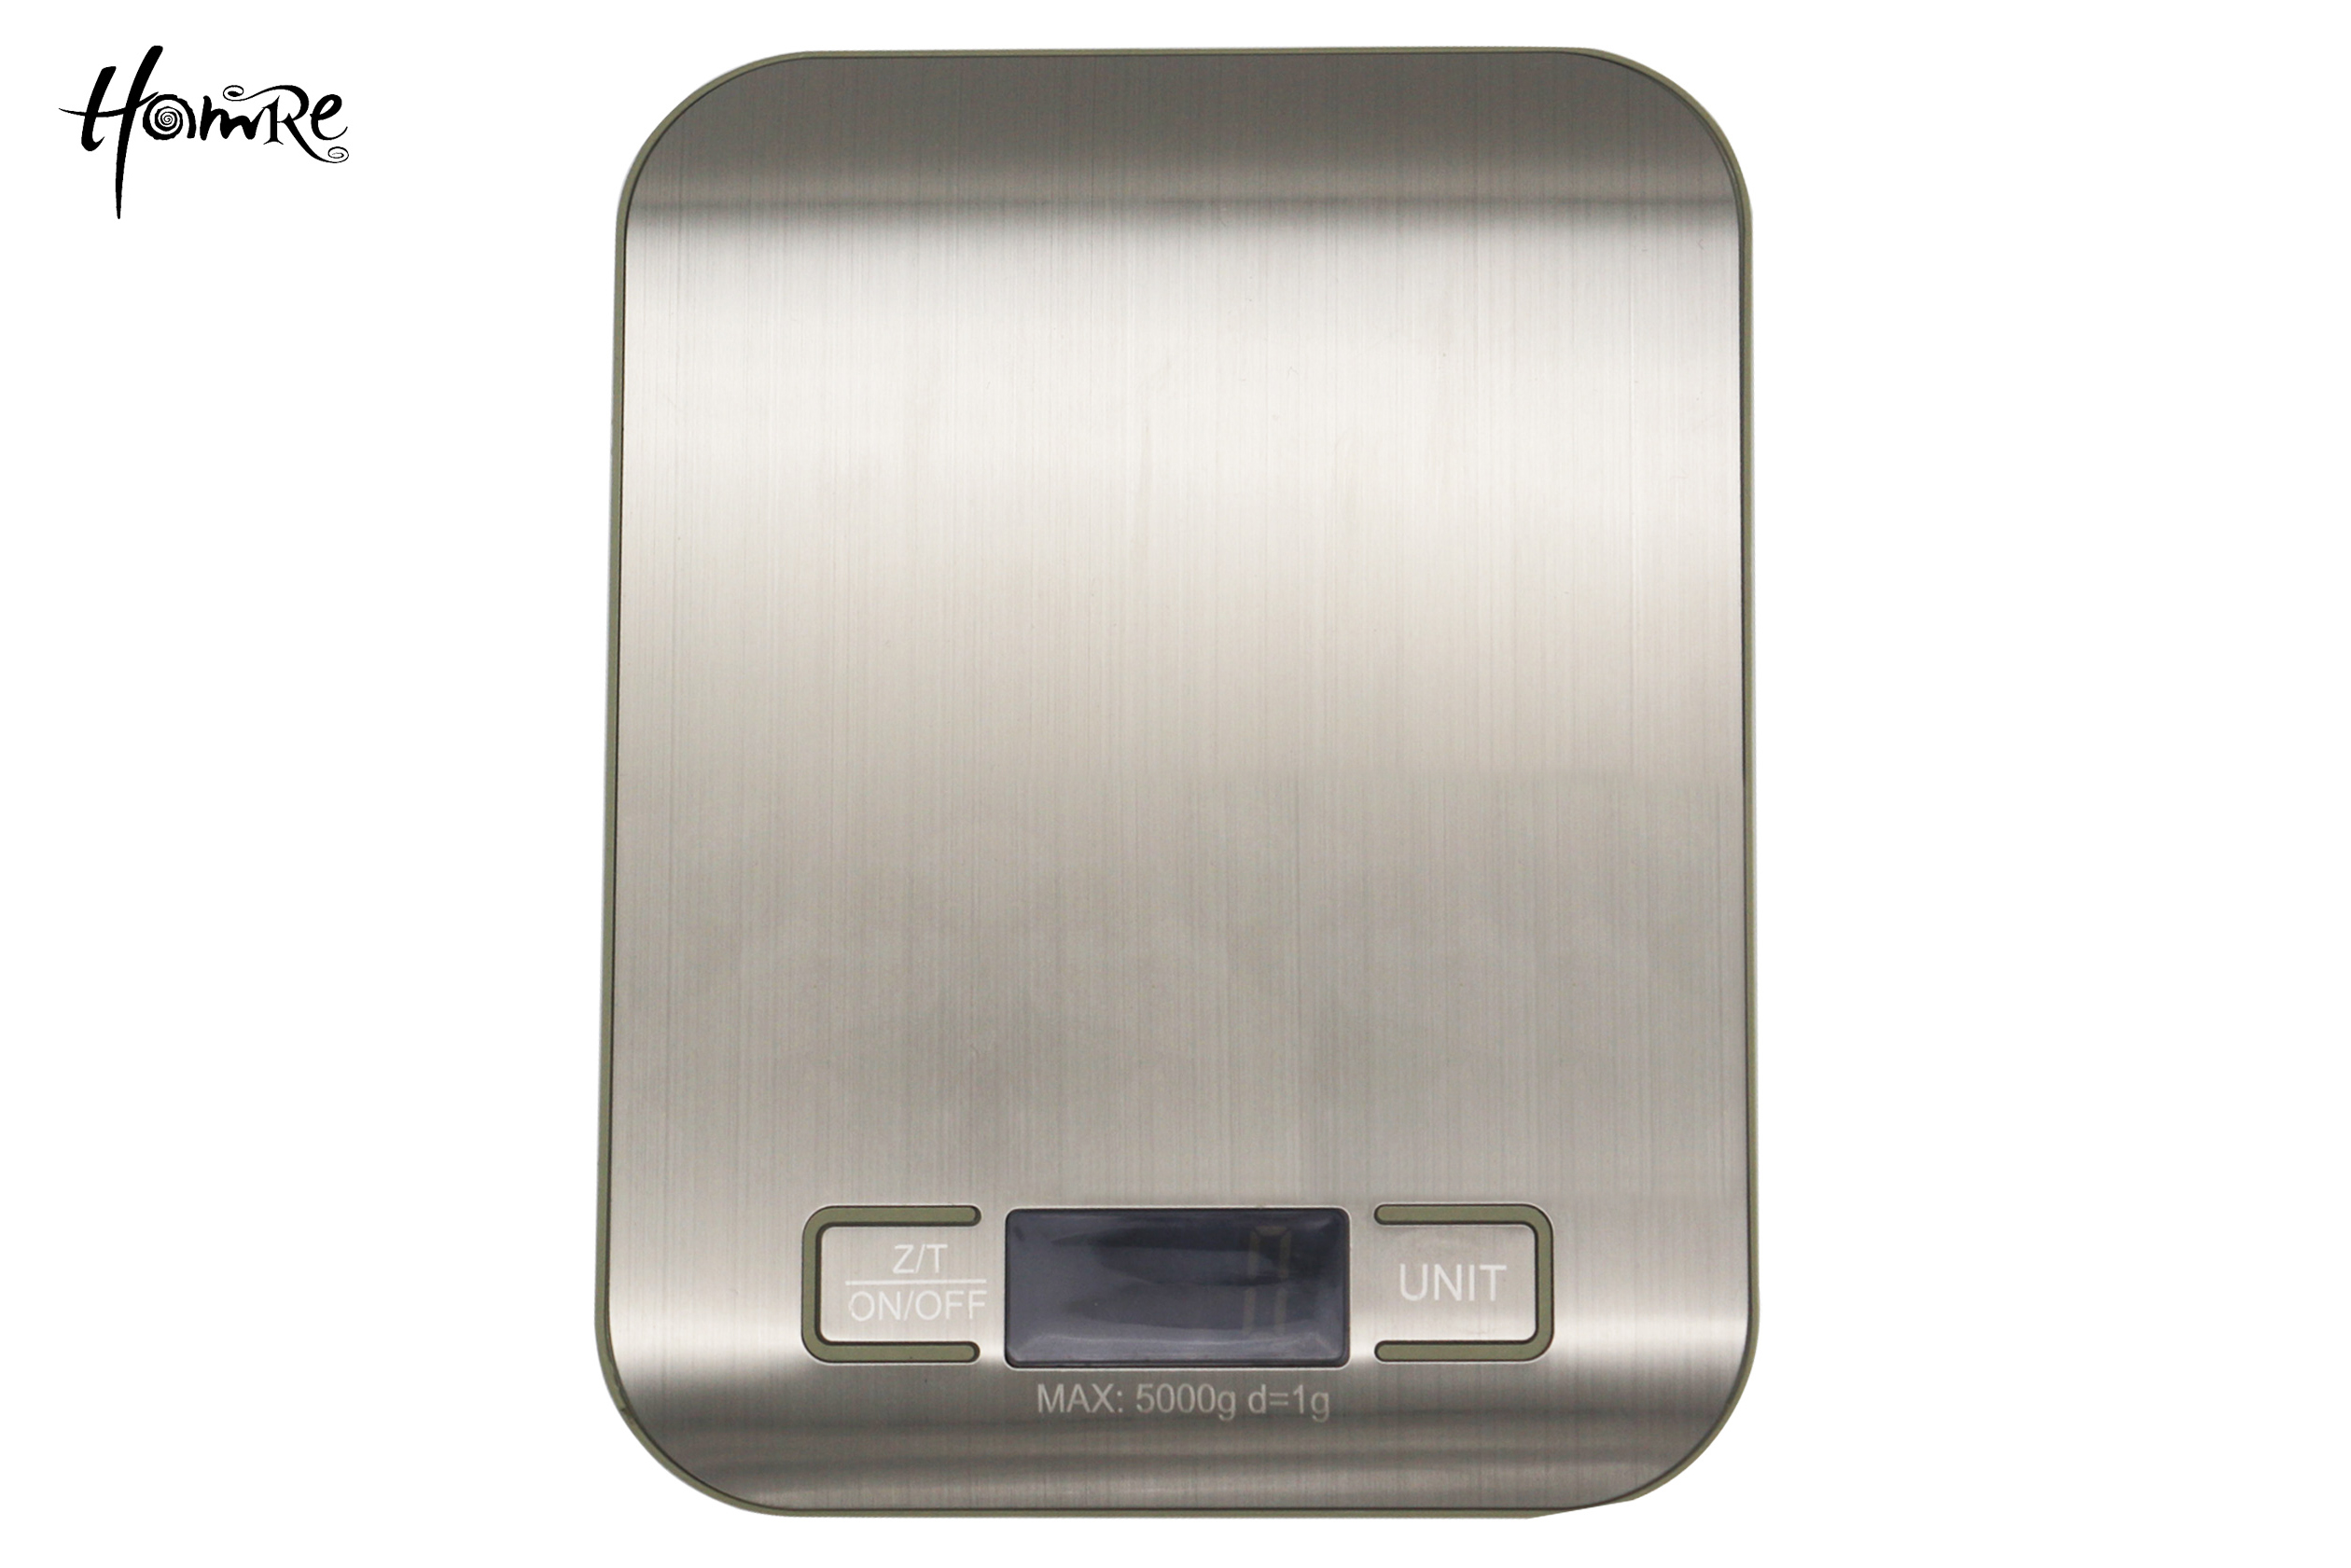 Compact Digital Drawing Process Stainless Steel Kitchen Scale